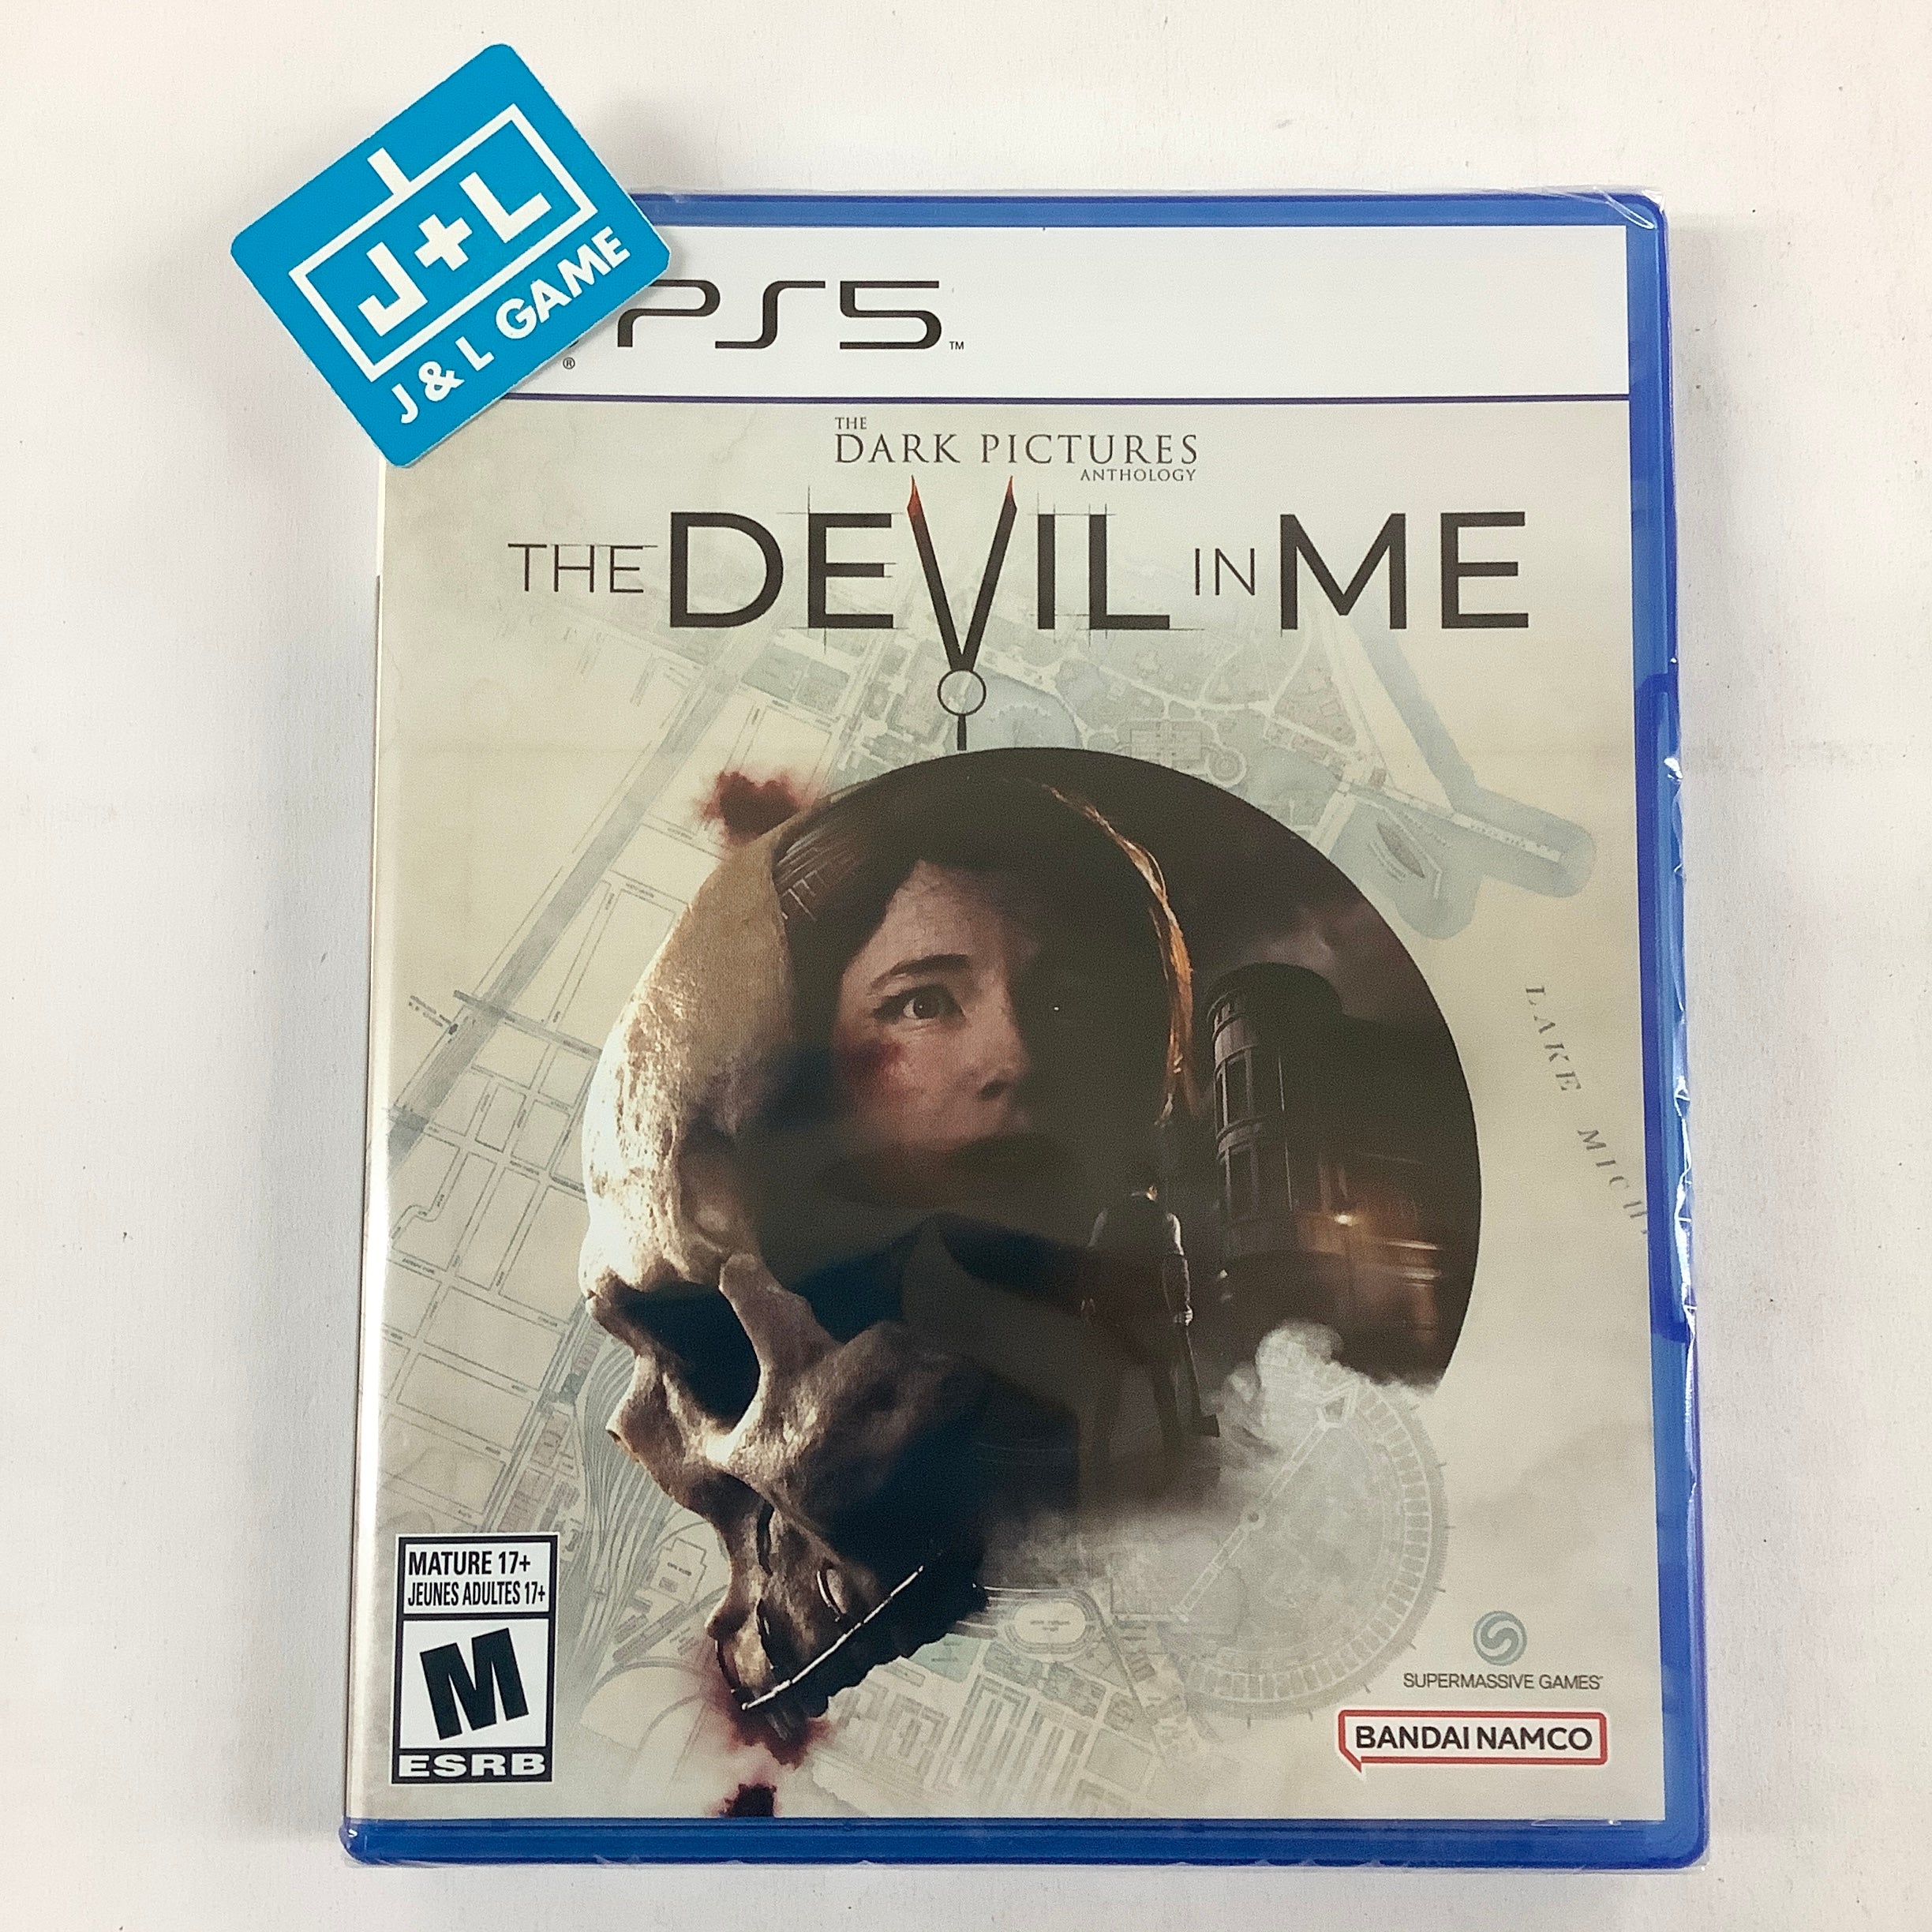 The Dark Pictures Anthology: The Devil in Me - (PS5) PlayStation 5 Video Games BANDAI NAMCO Entertainment   